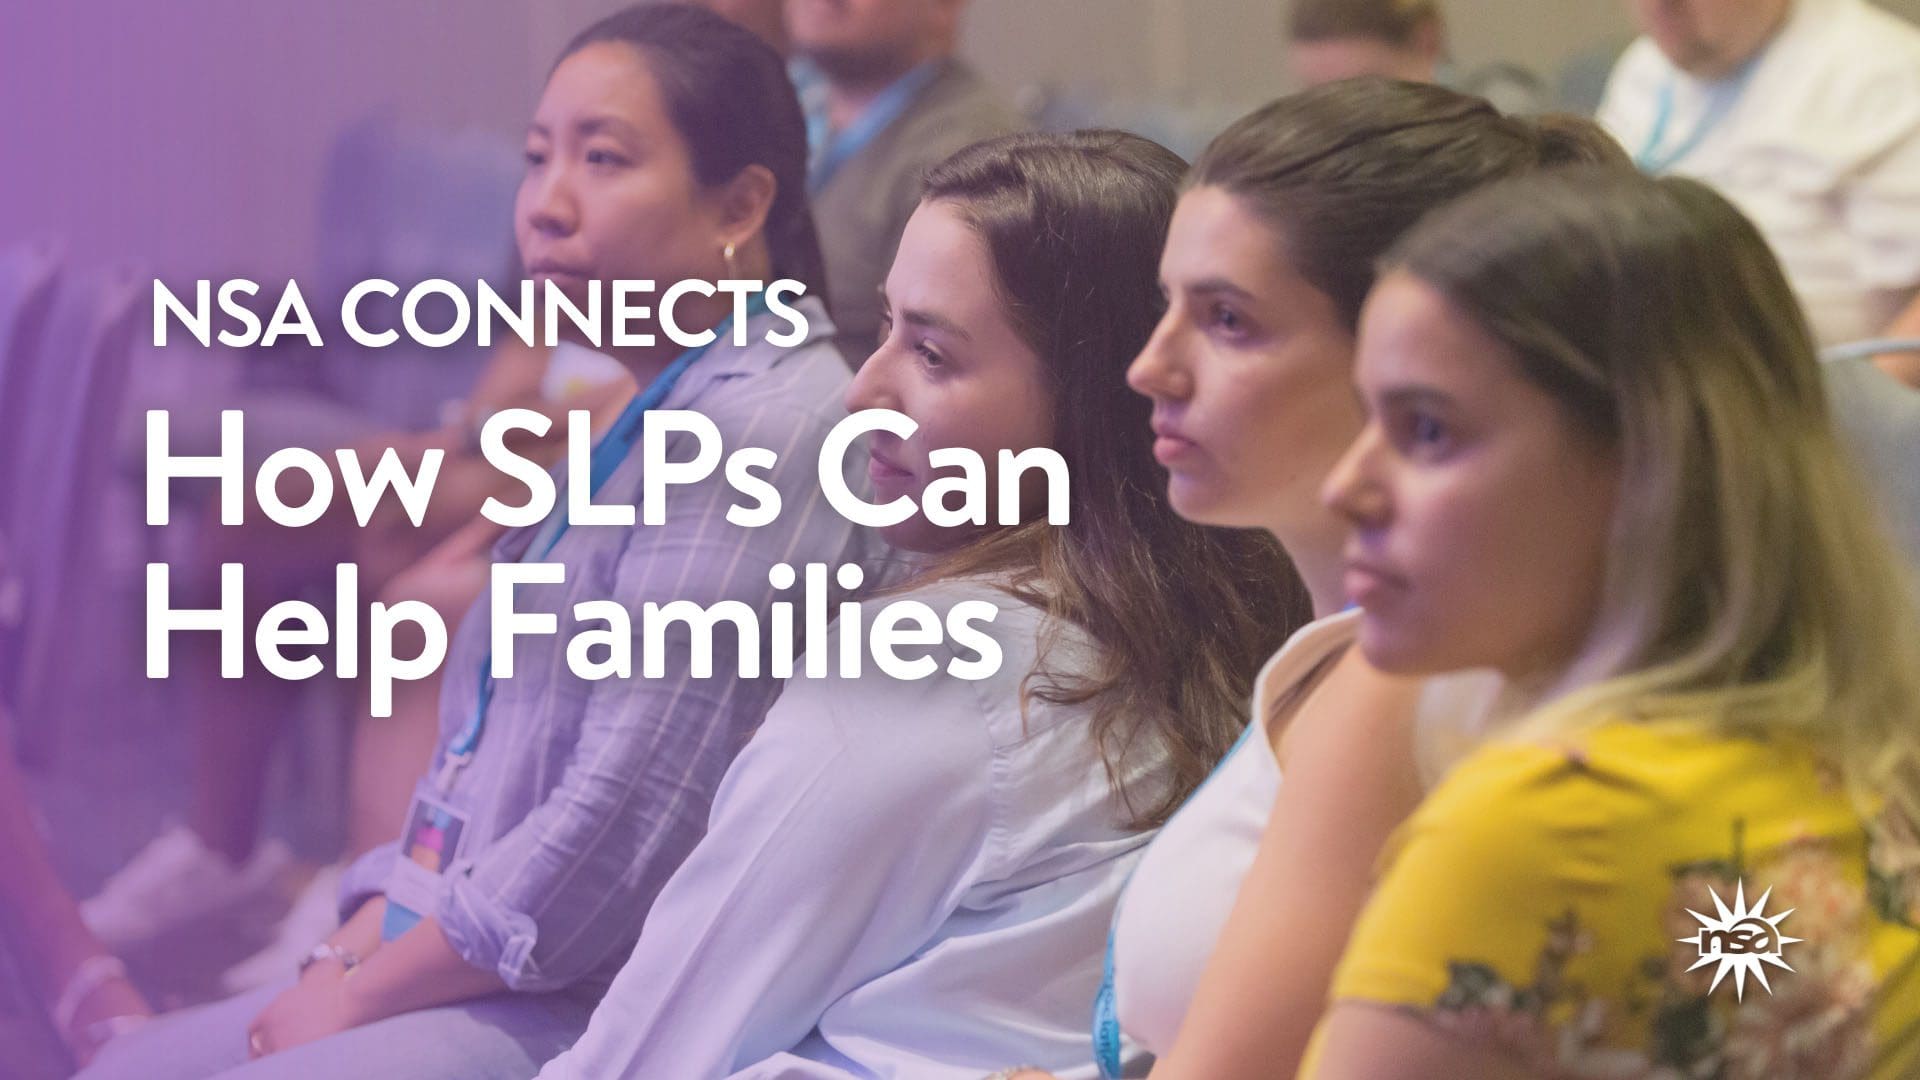 NSA Connects: How SLPs Can Help Families